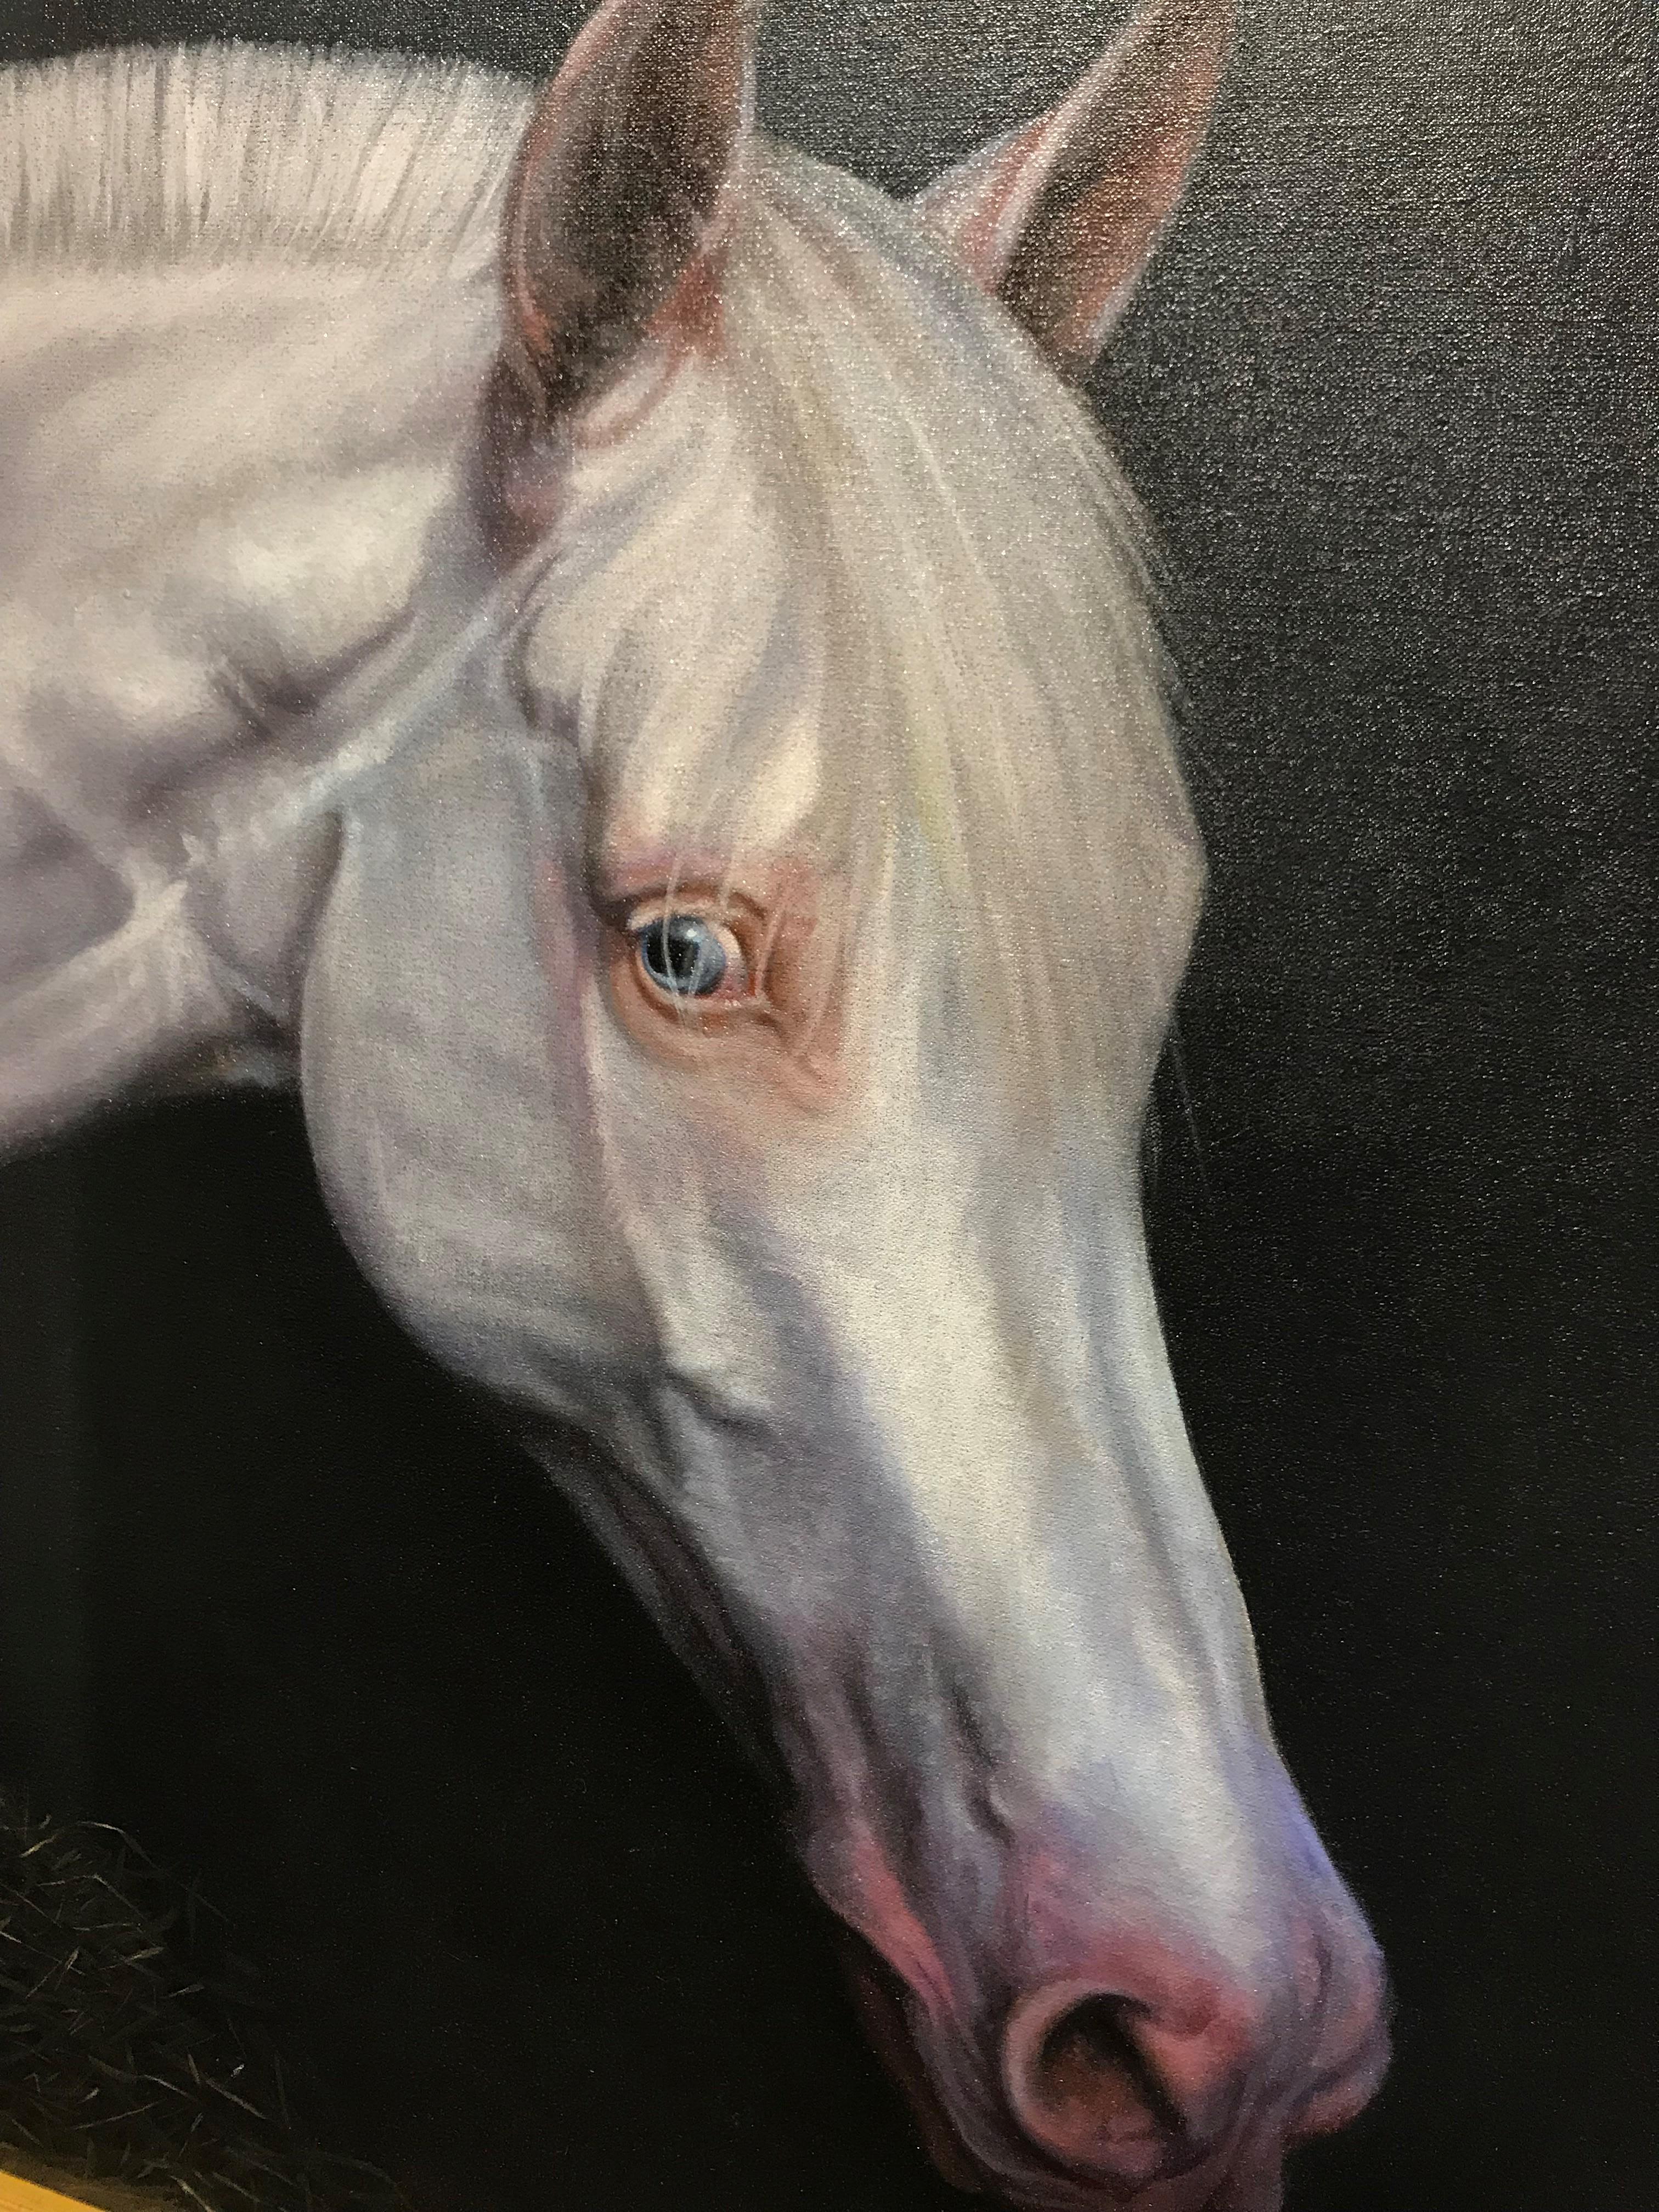 Striking large white horse on black background photoreal portrait 30 x 40  - Painting by Roger Henry